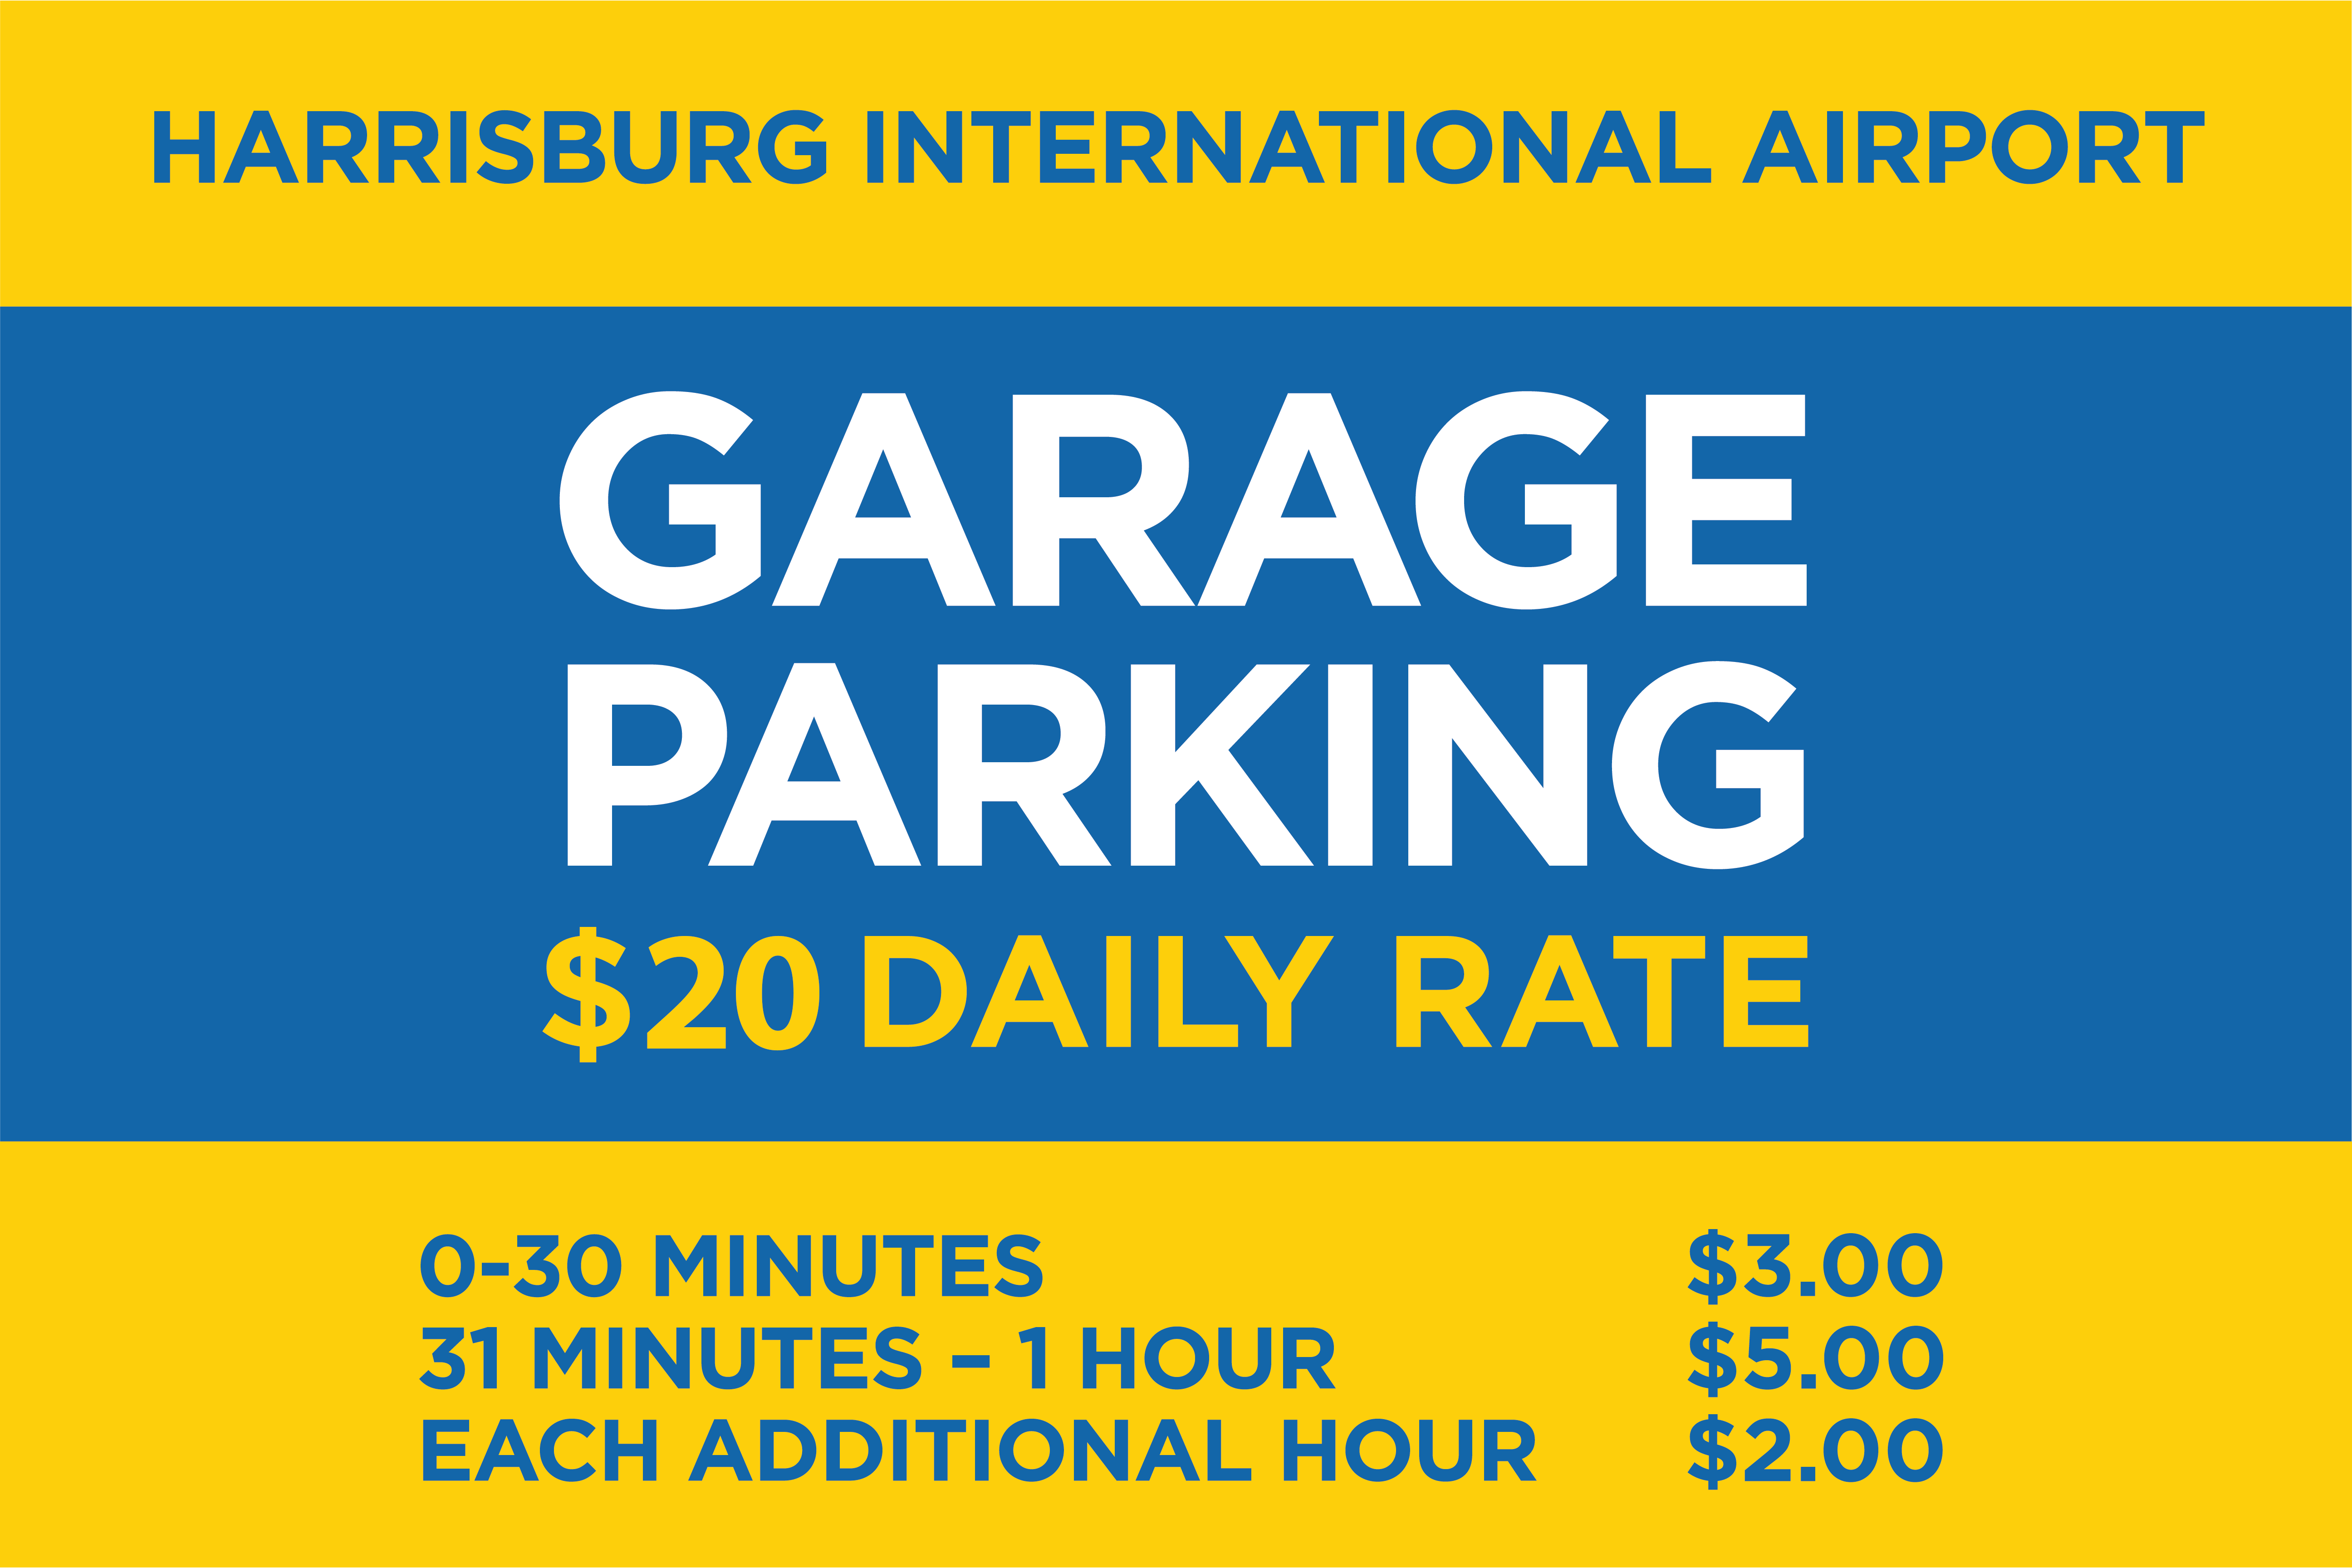 Free employee parking in MIA garages starting March 31